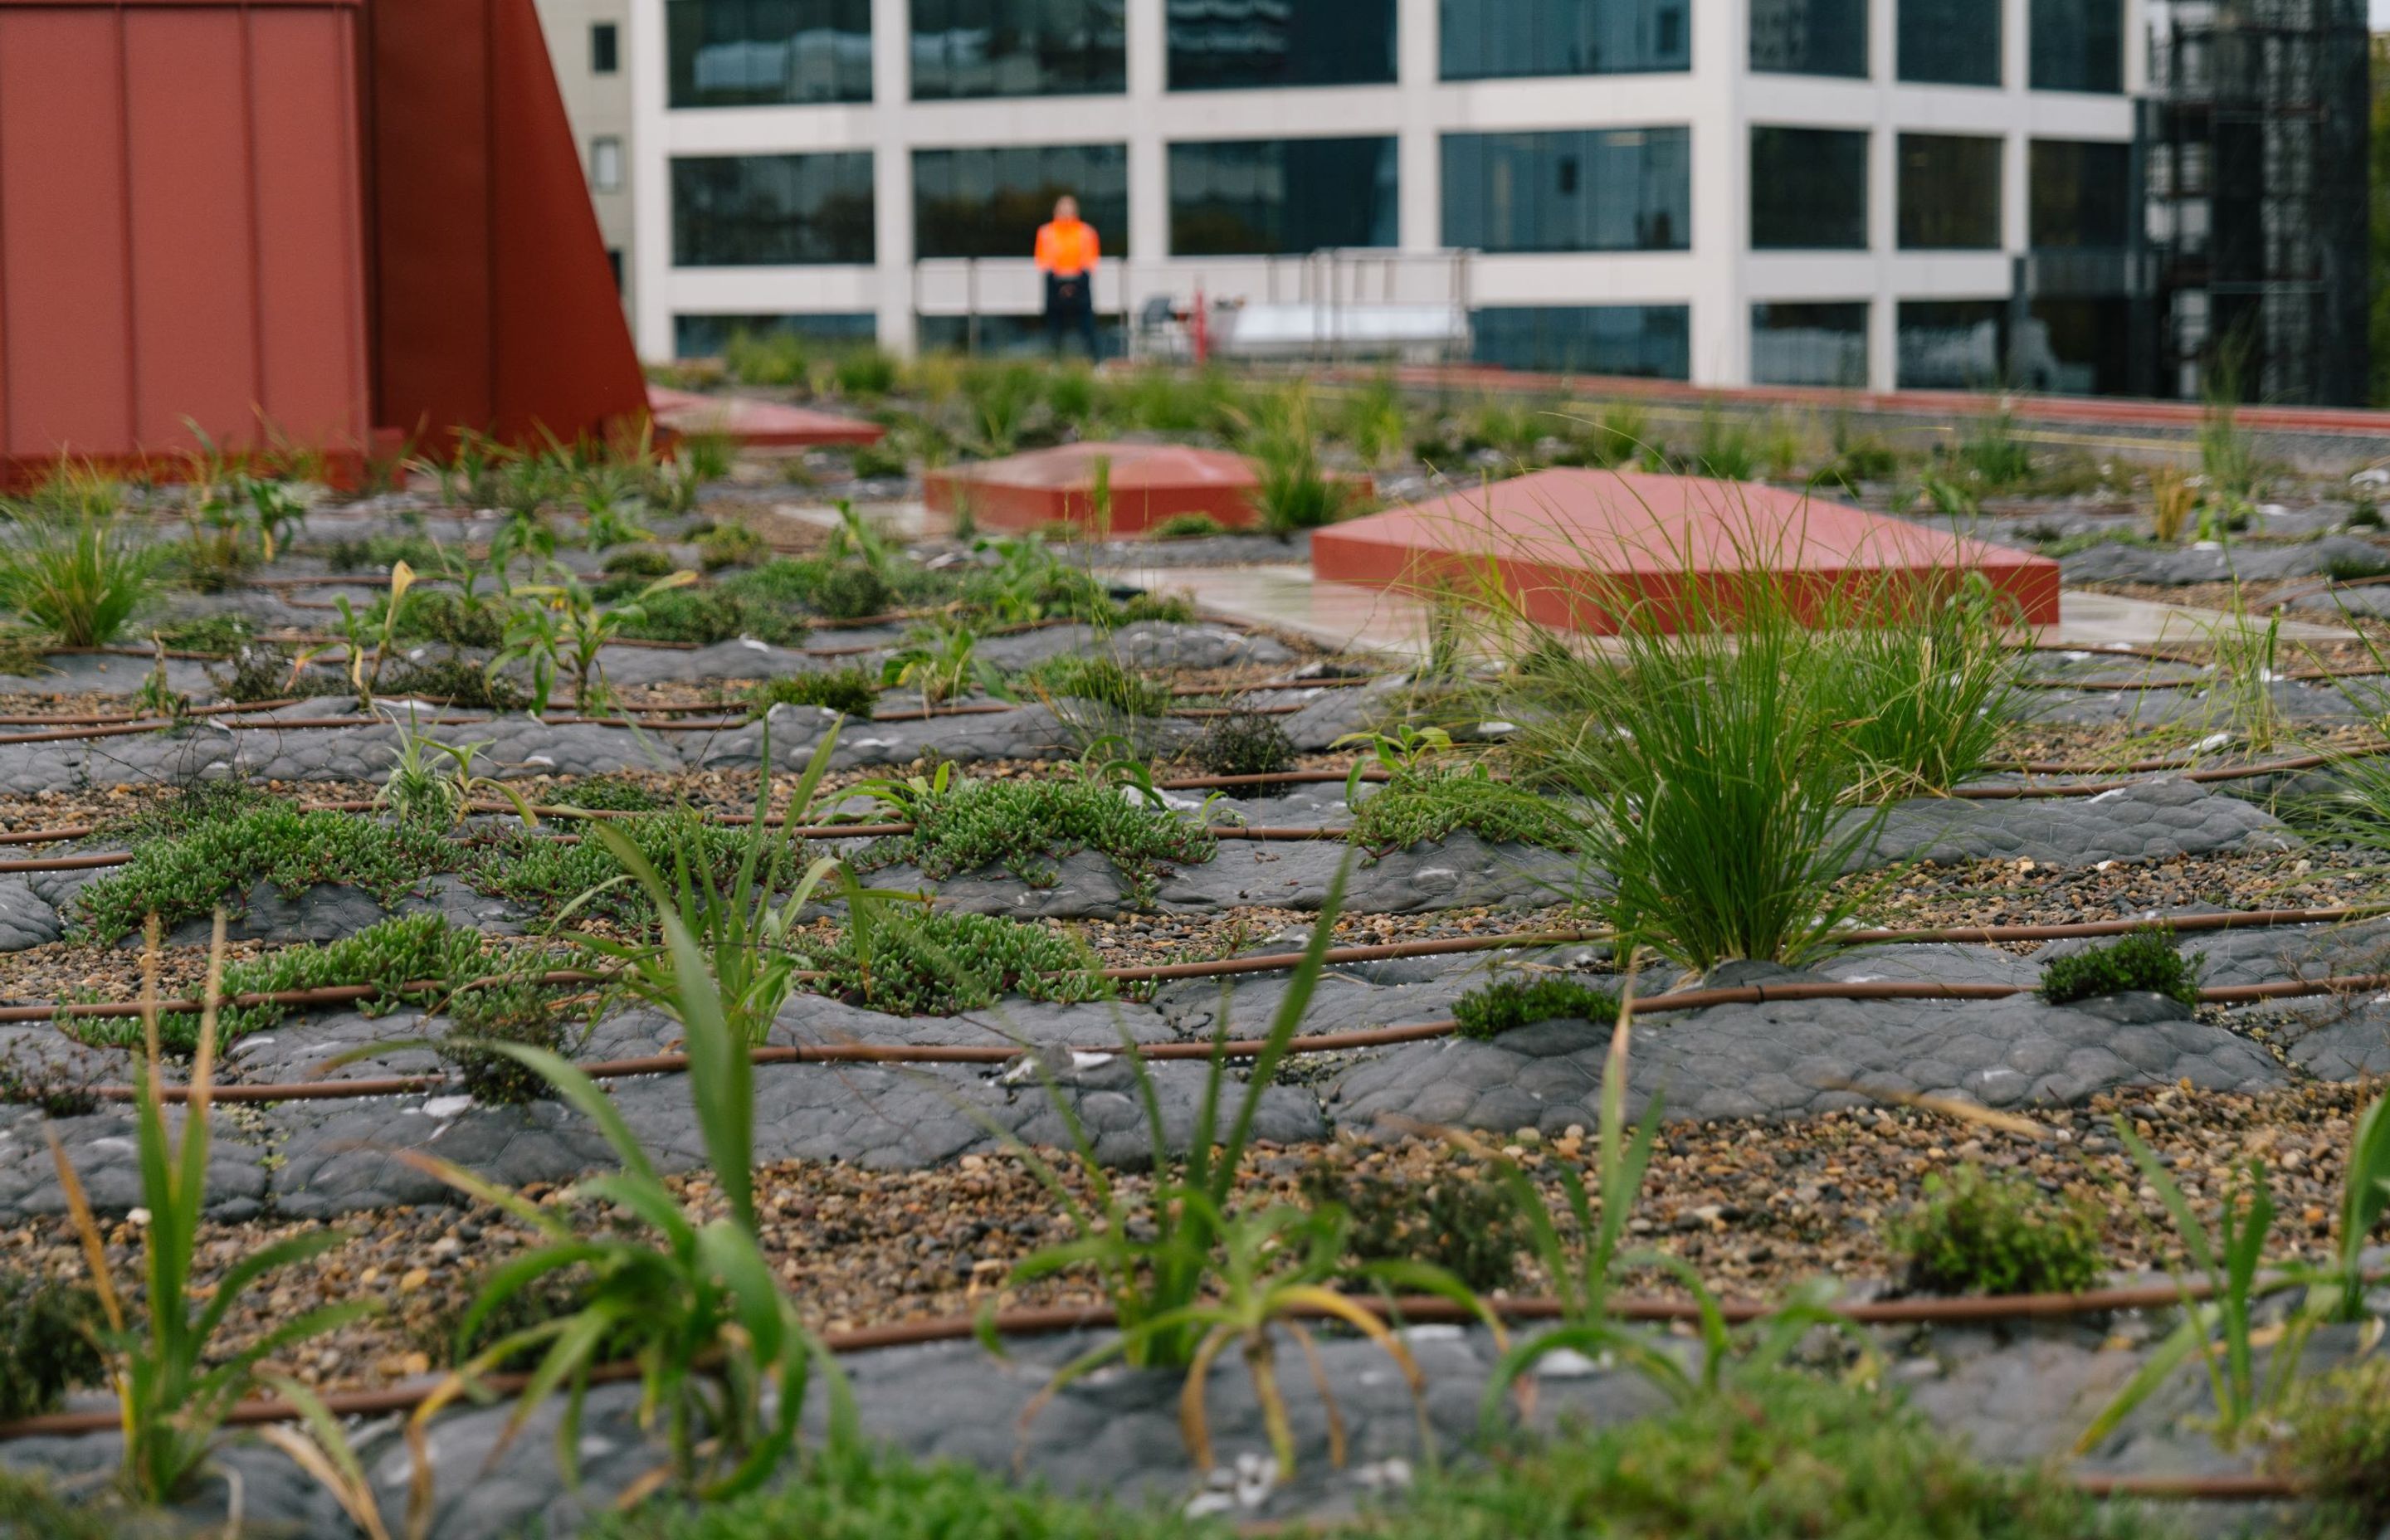 Auckland City Library Green Roof